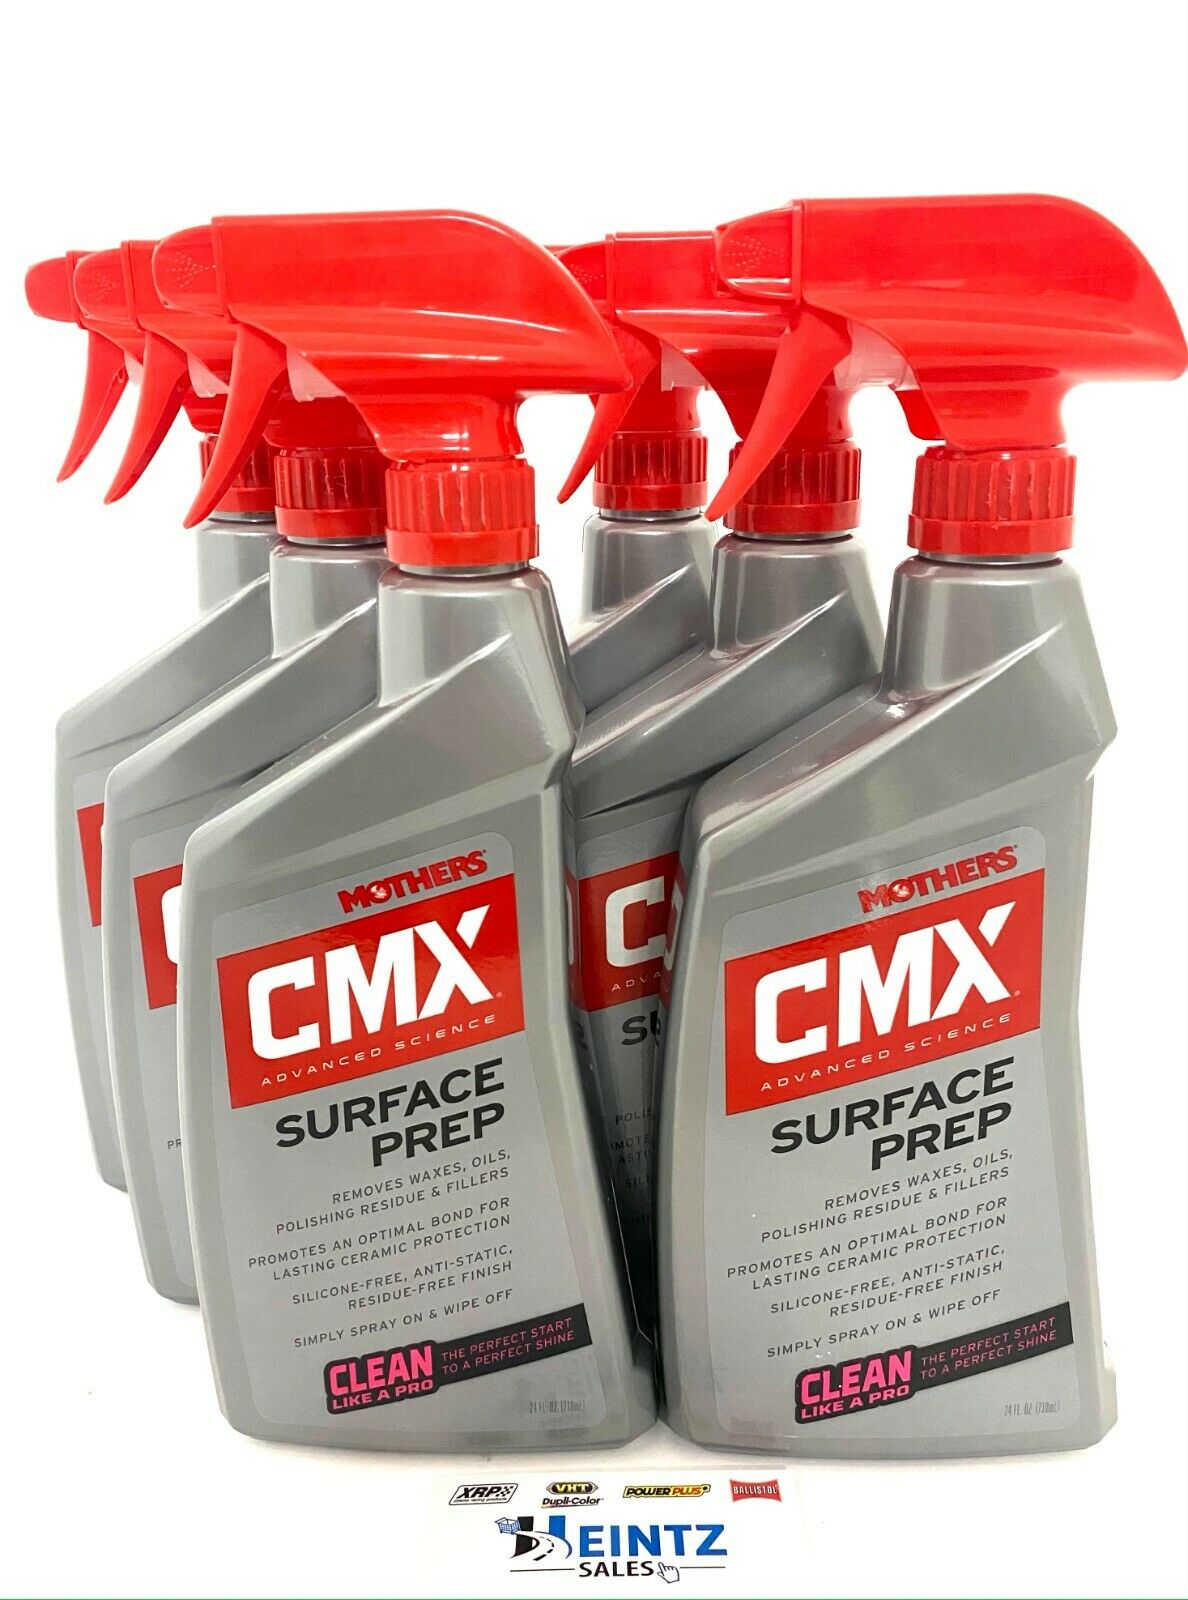 MOTHERS 01224 CMX Surface Prep Spray 6 PACK - Silicone Free - Anti-Static - 24 fl. oz.